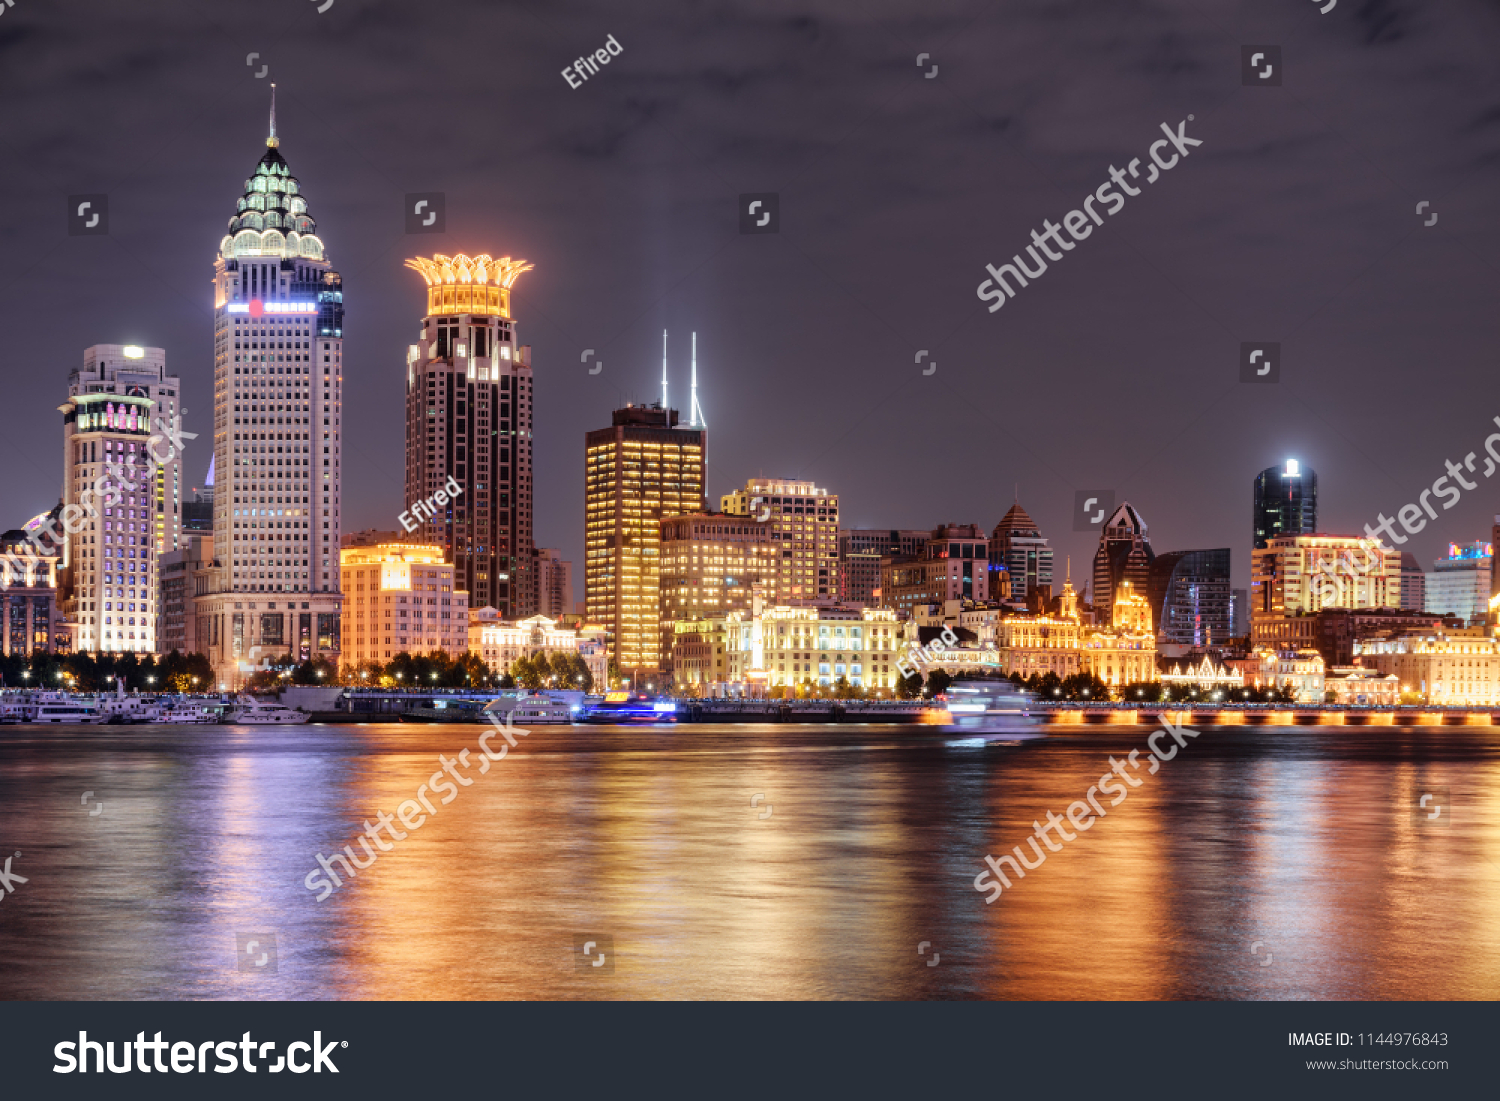 Amazing night view of Puxi skyline in Shanghai, China. Modern and old buildings of the Bund (Waitan) at historic center. Colorful city lights reflected in water of the Huangpu River. #1144976843